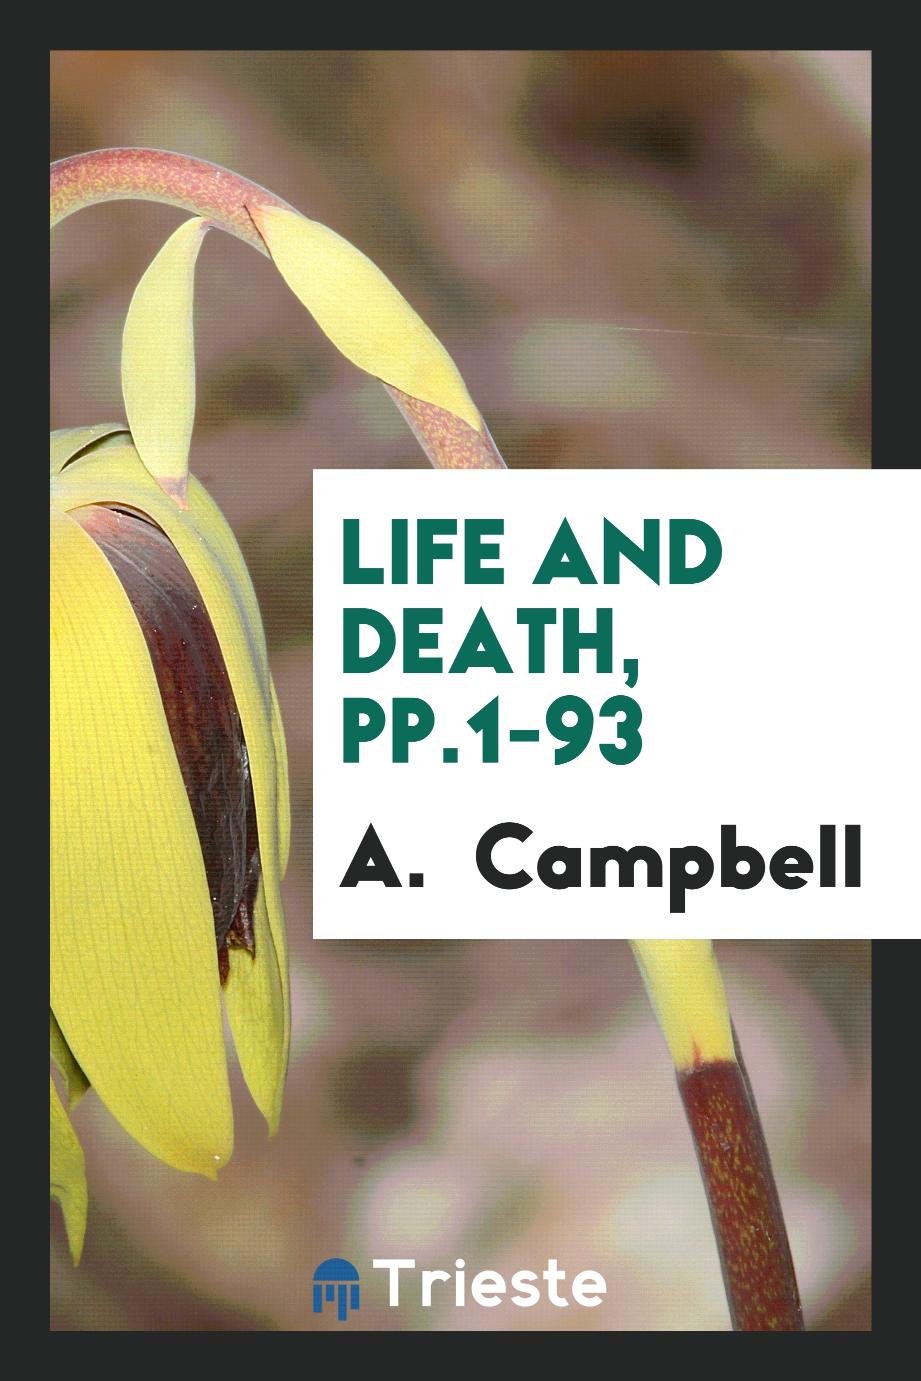 Life and Death, pp.1-93